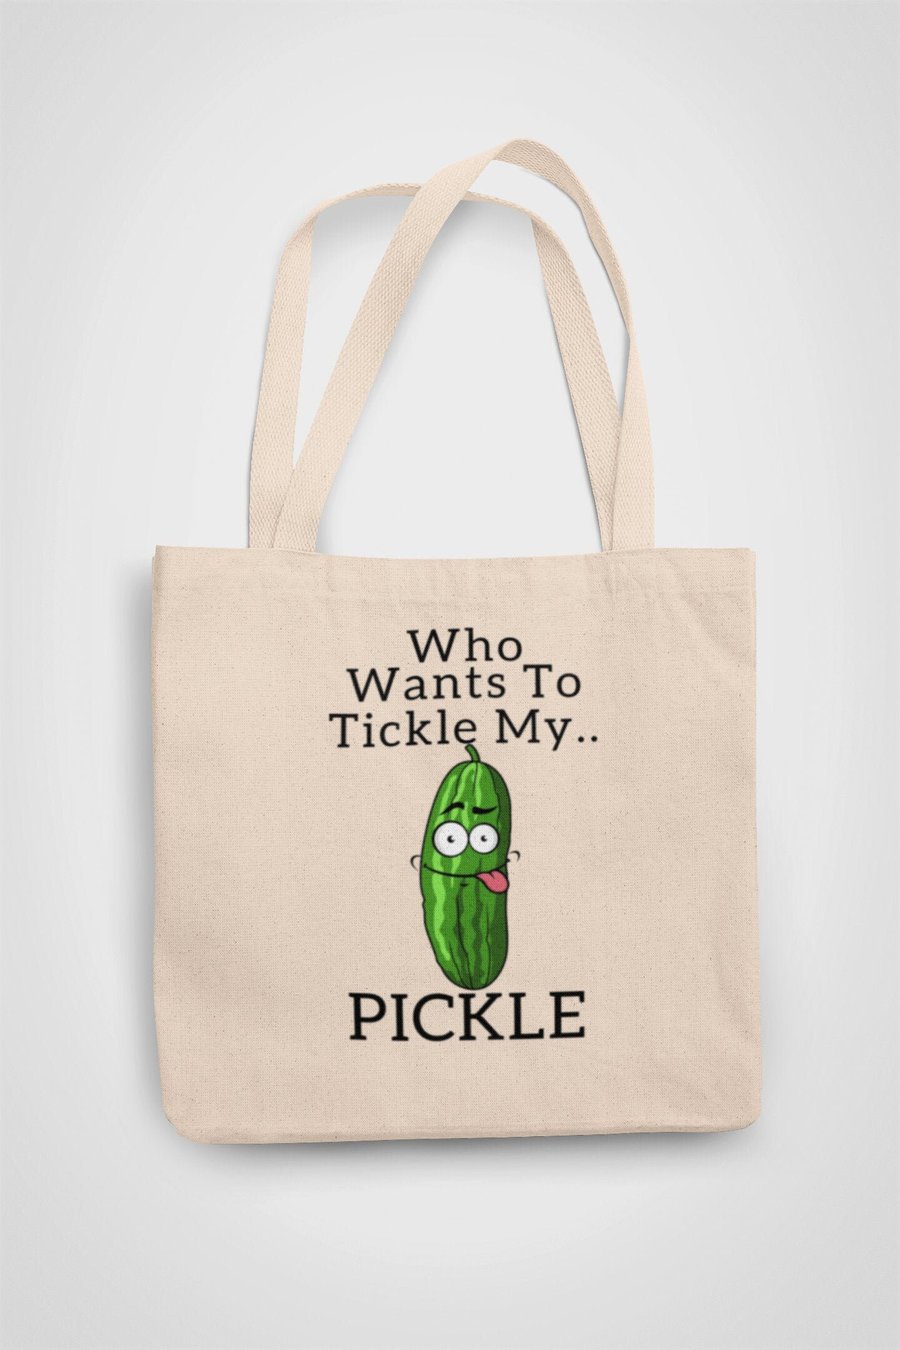 Who wants to Tickle my Pickle Tote Bag Reusable Cotton bag - funny adult 